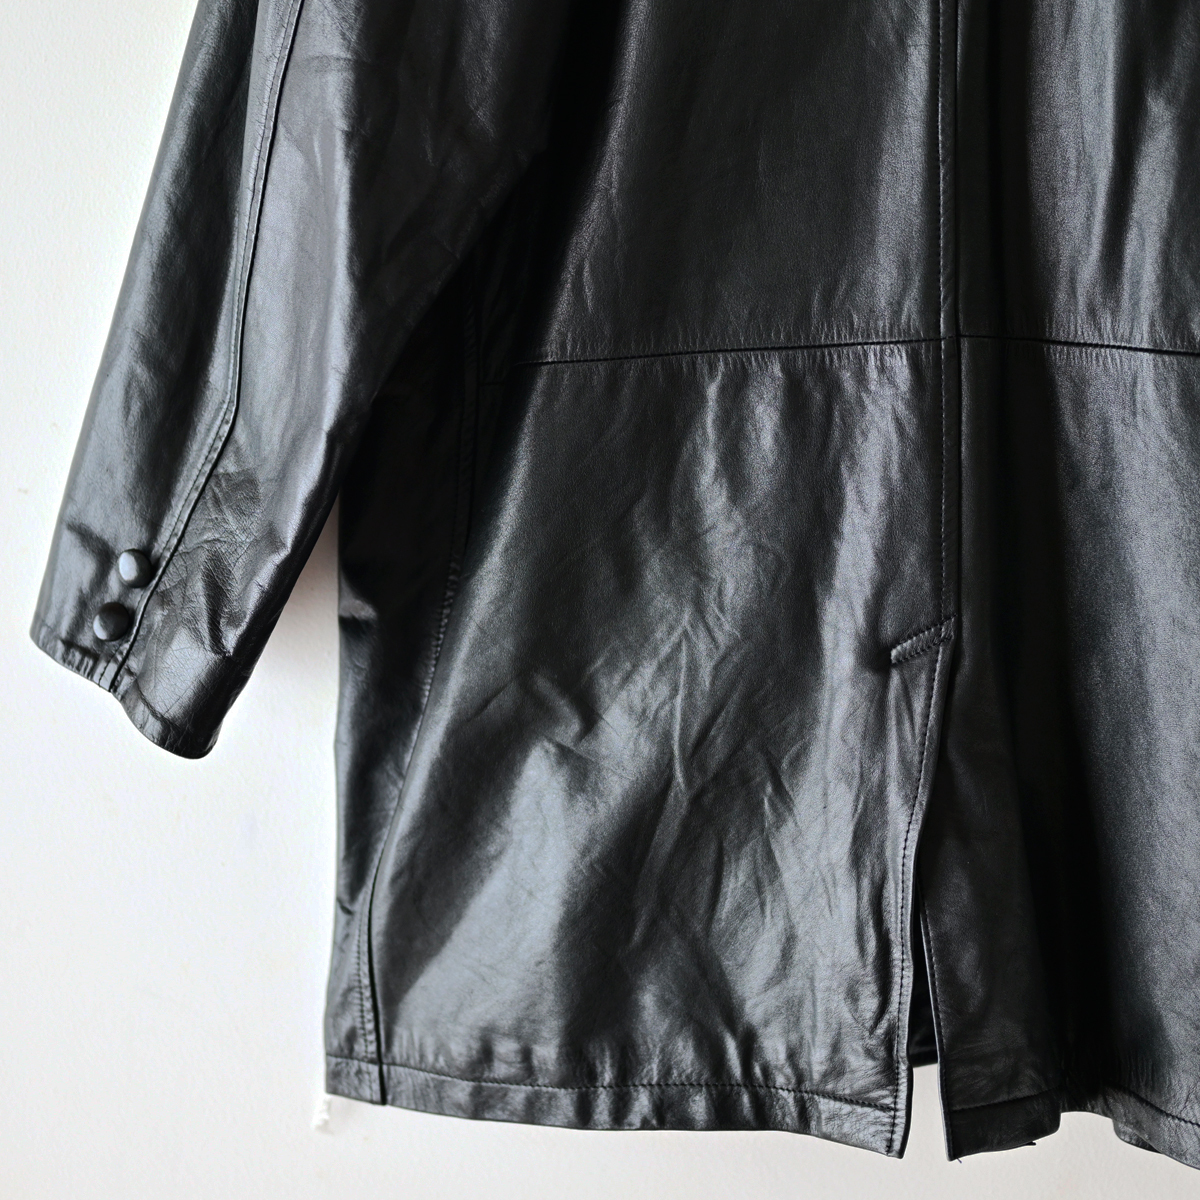 90skau leather car coat black black free size / Vintage 80s USA American Casual original leather coverall jacket 